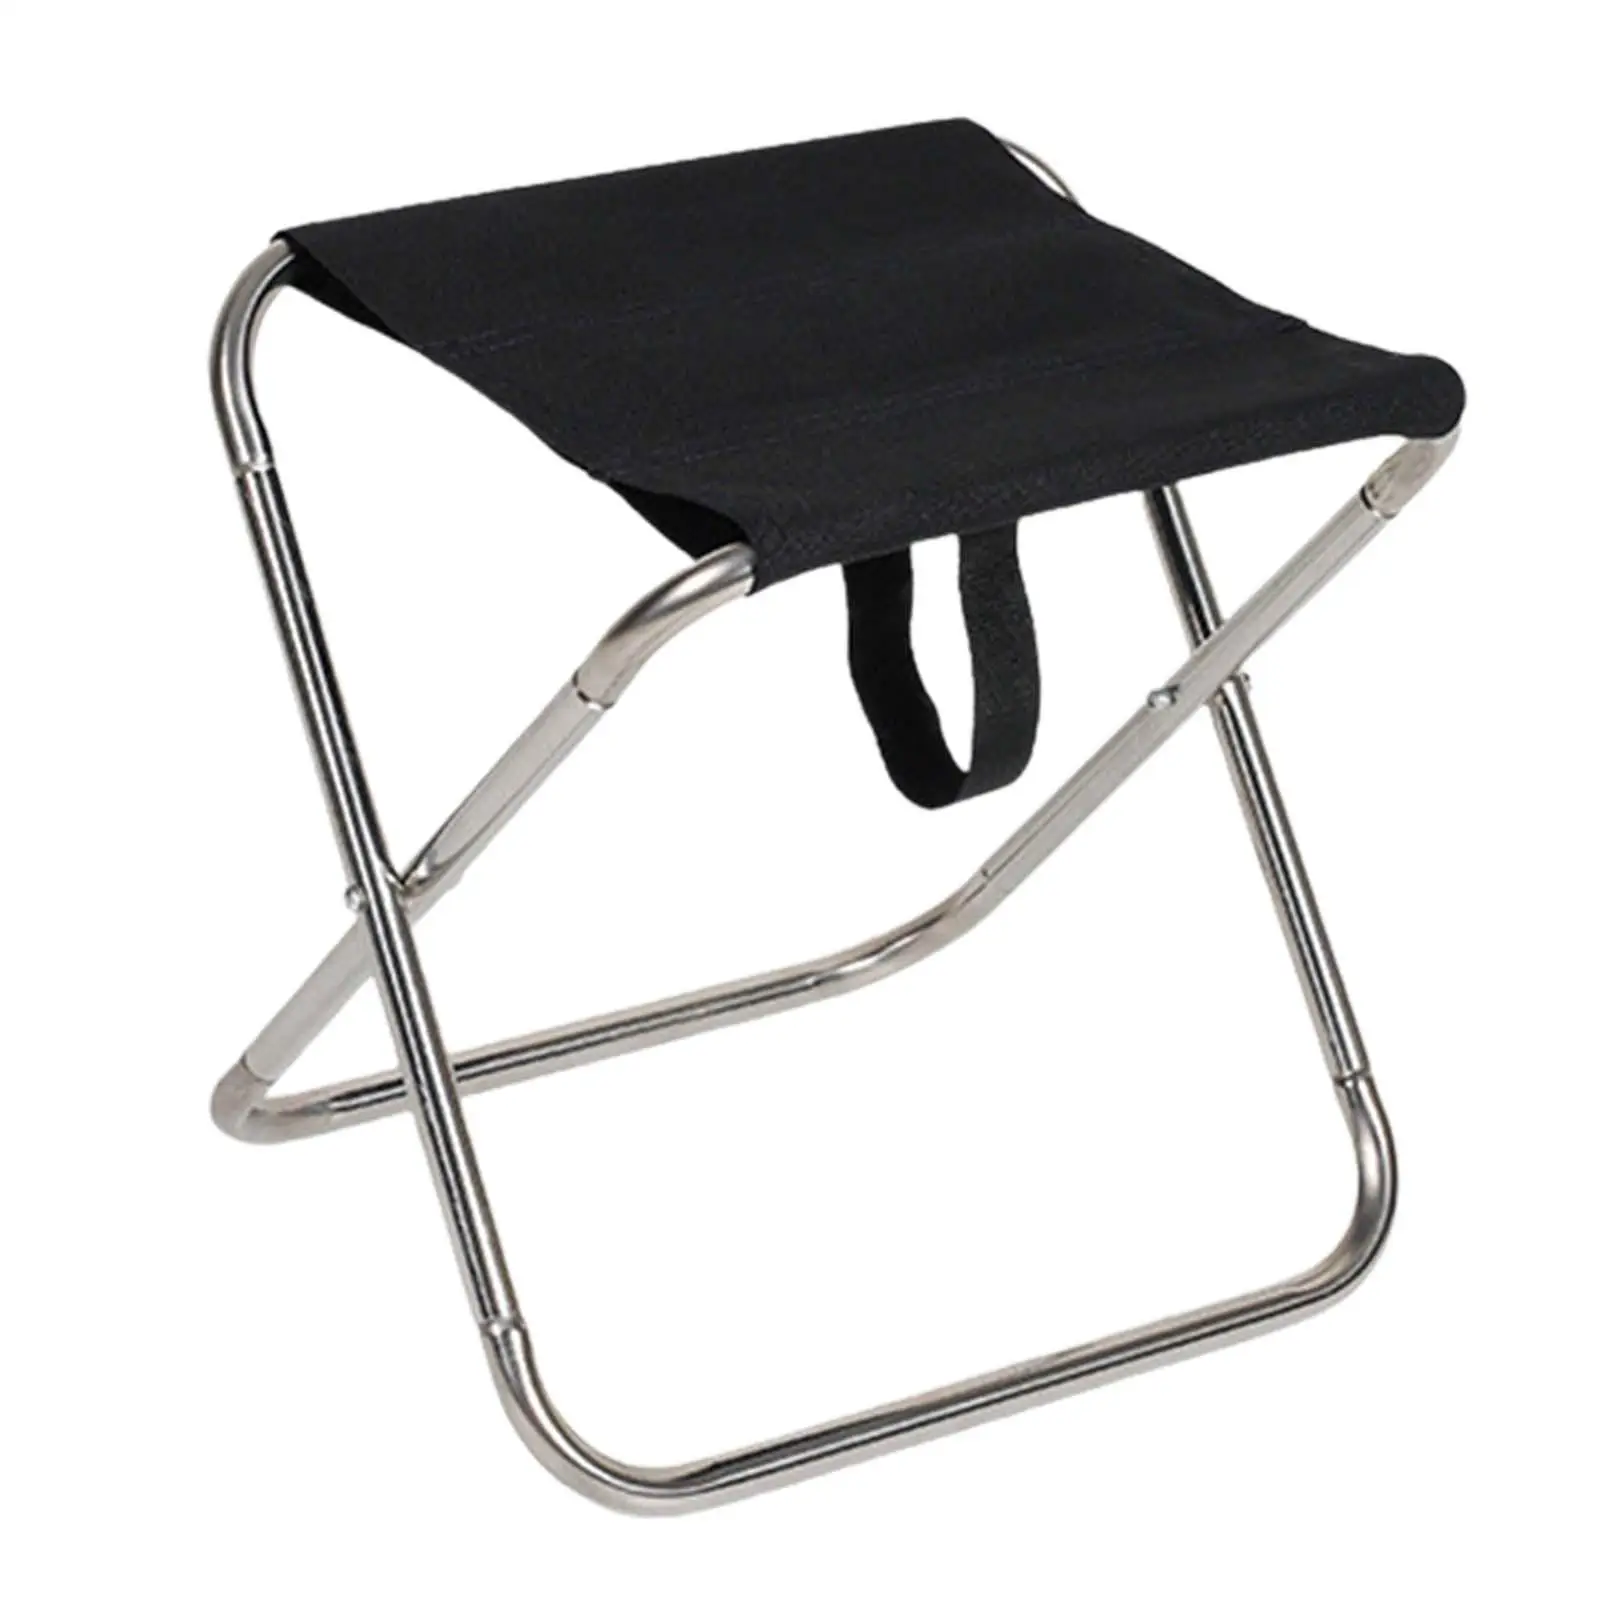 Camping Stool Folding Camping Seat Small Camping Chair Strong Load Capacity Saddle Chair for Lawn Travel Barbecue Sports Concert